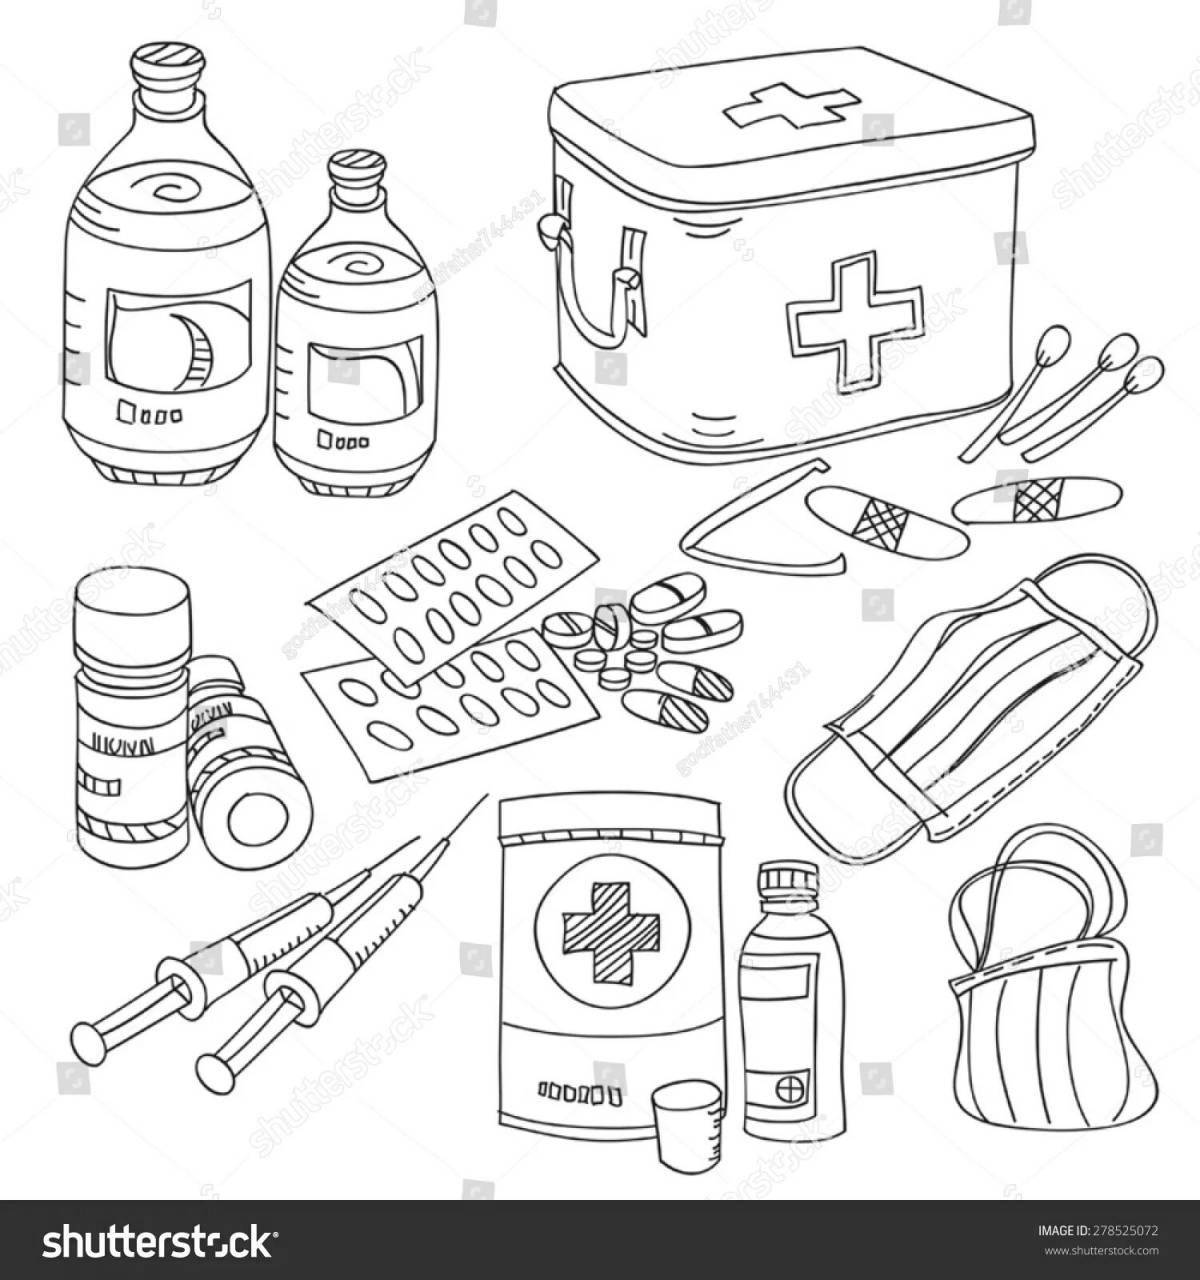 Coloured gorgeous first aid kit coloring book